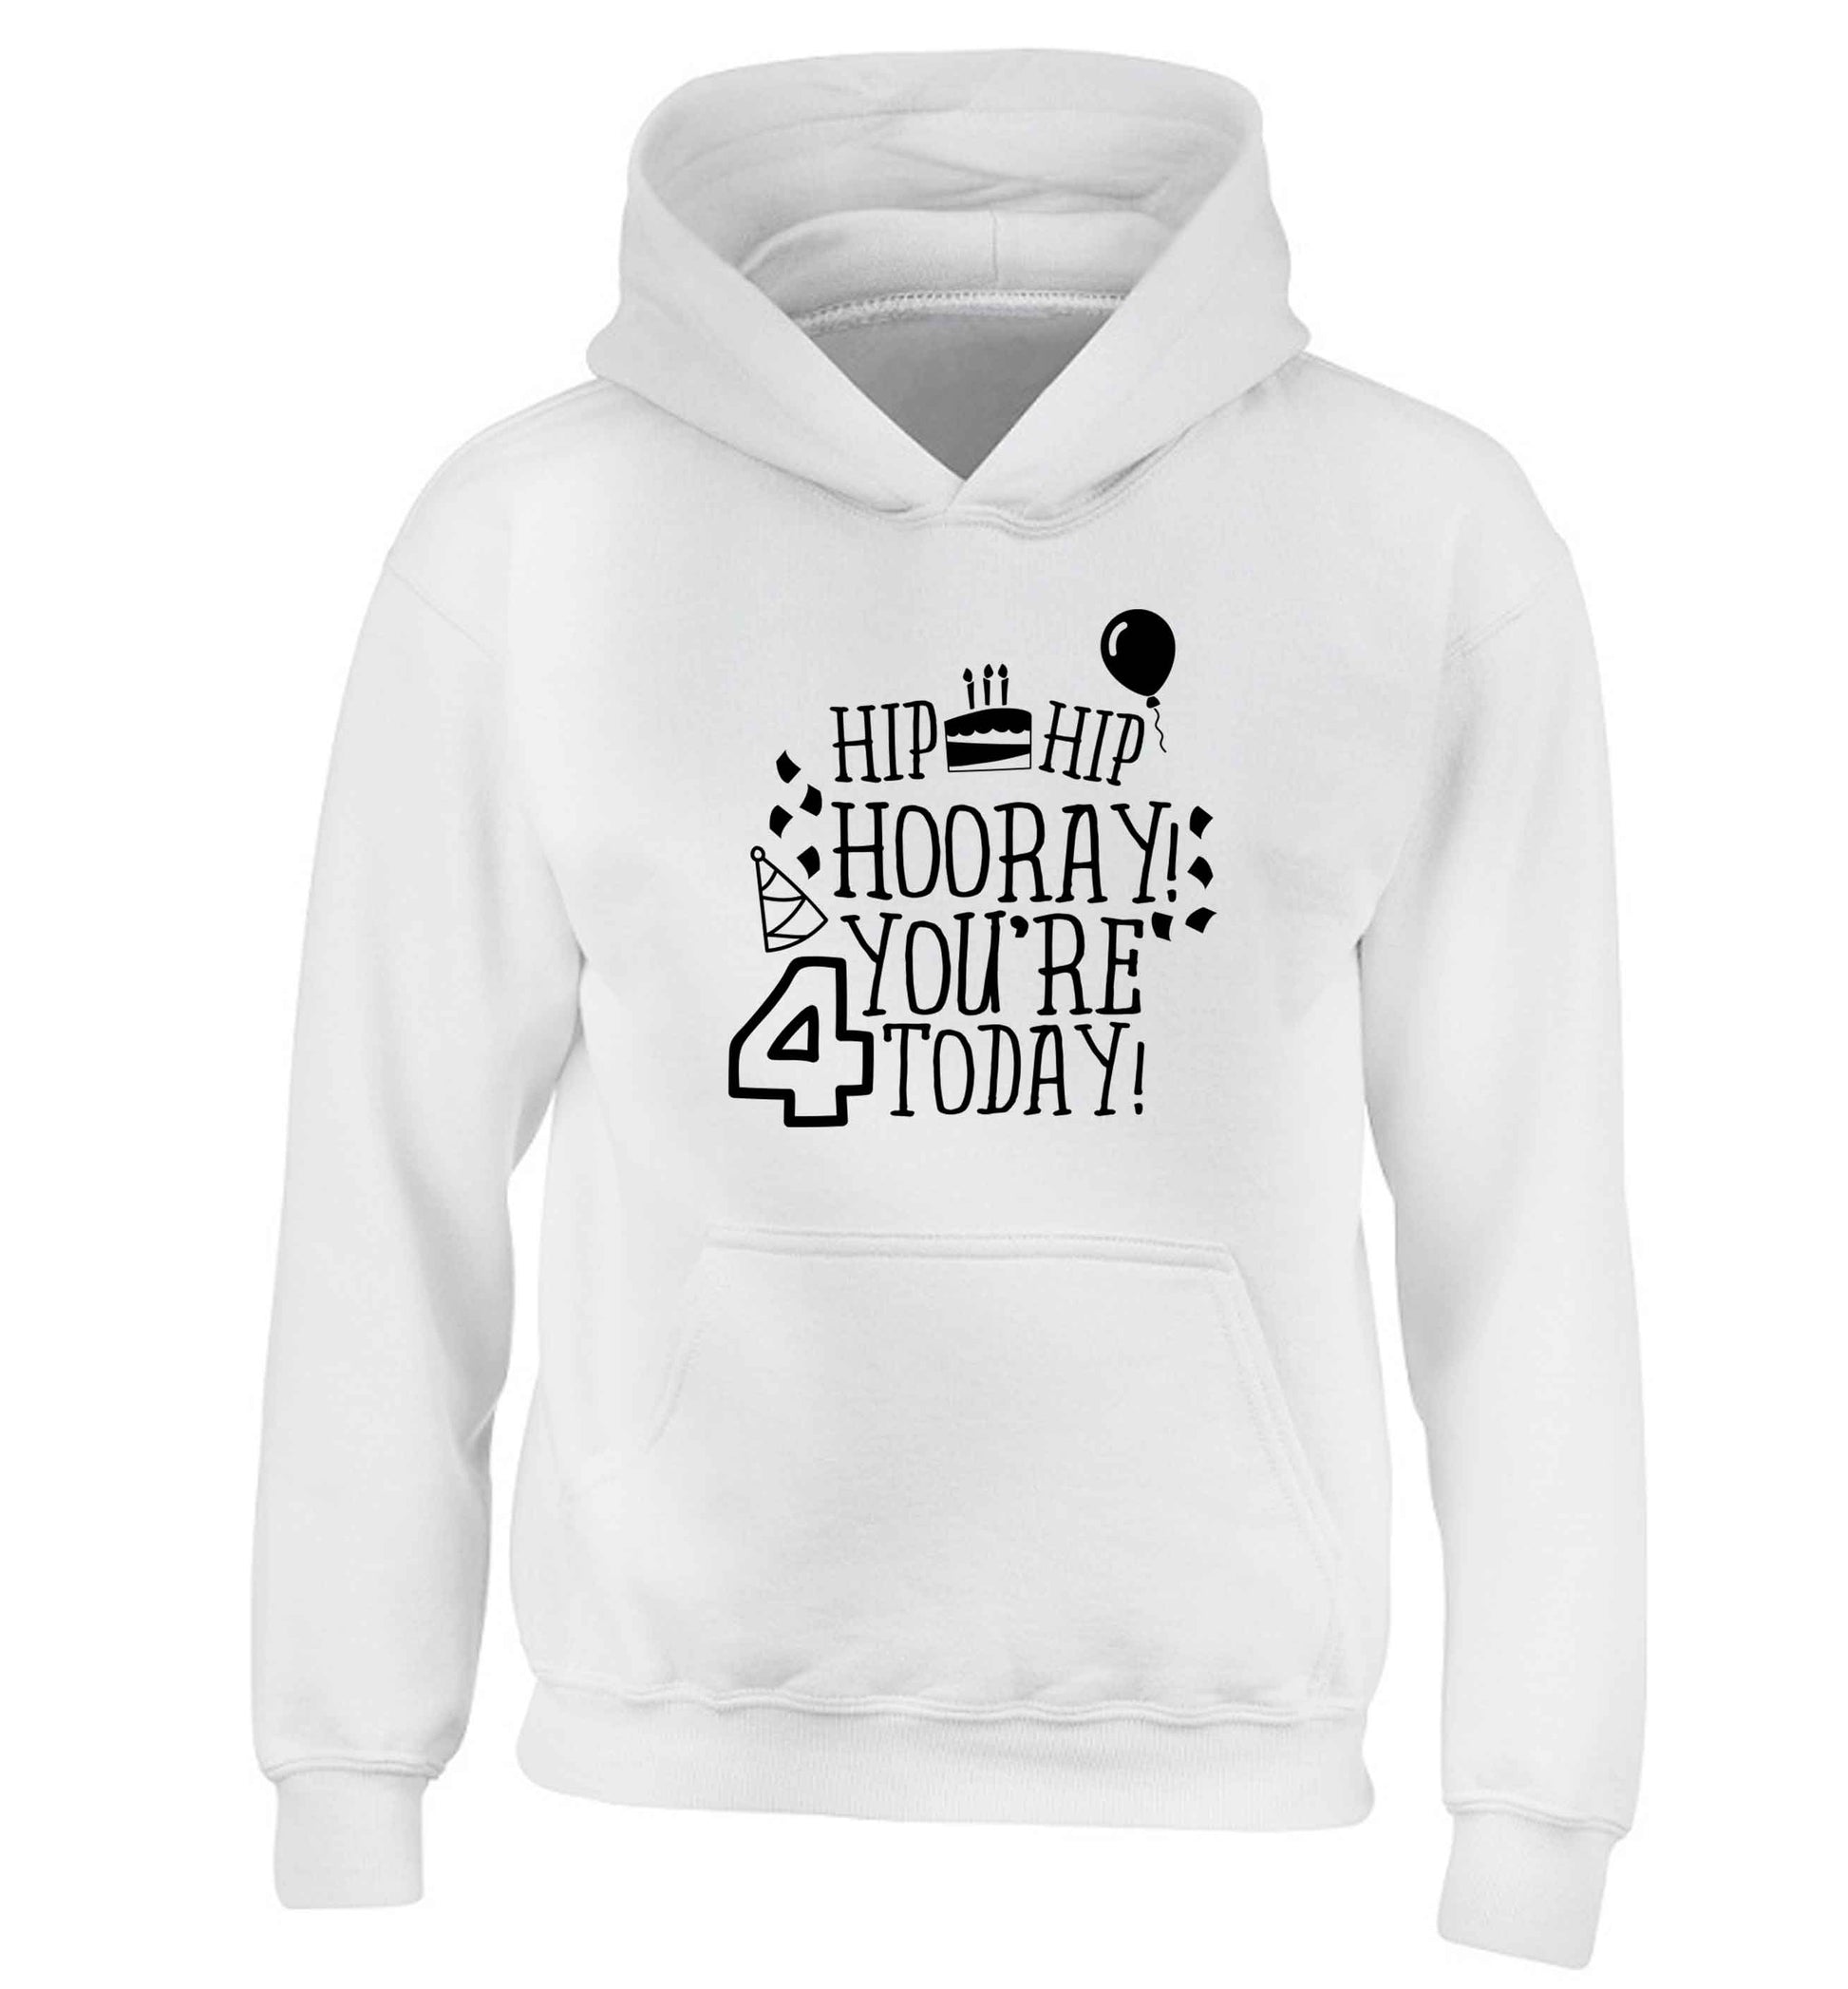 Hip hip hooray you're four today!children's white hoodie 12-13 Years